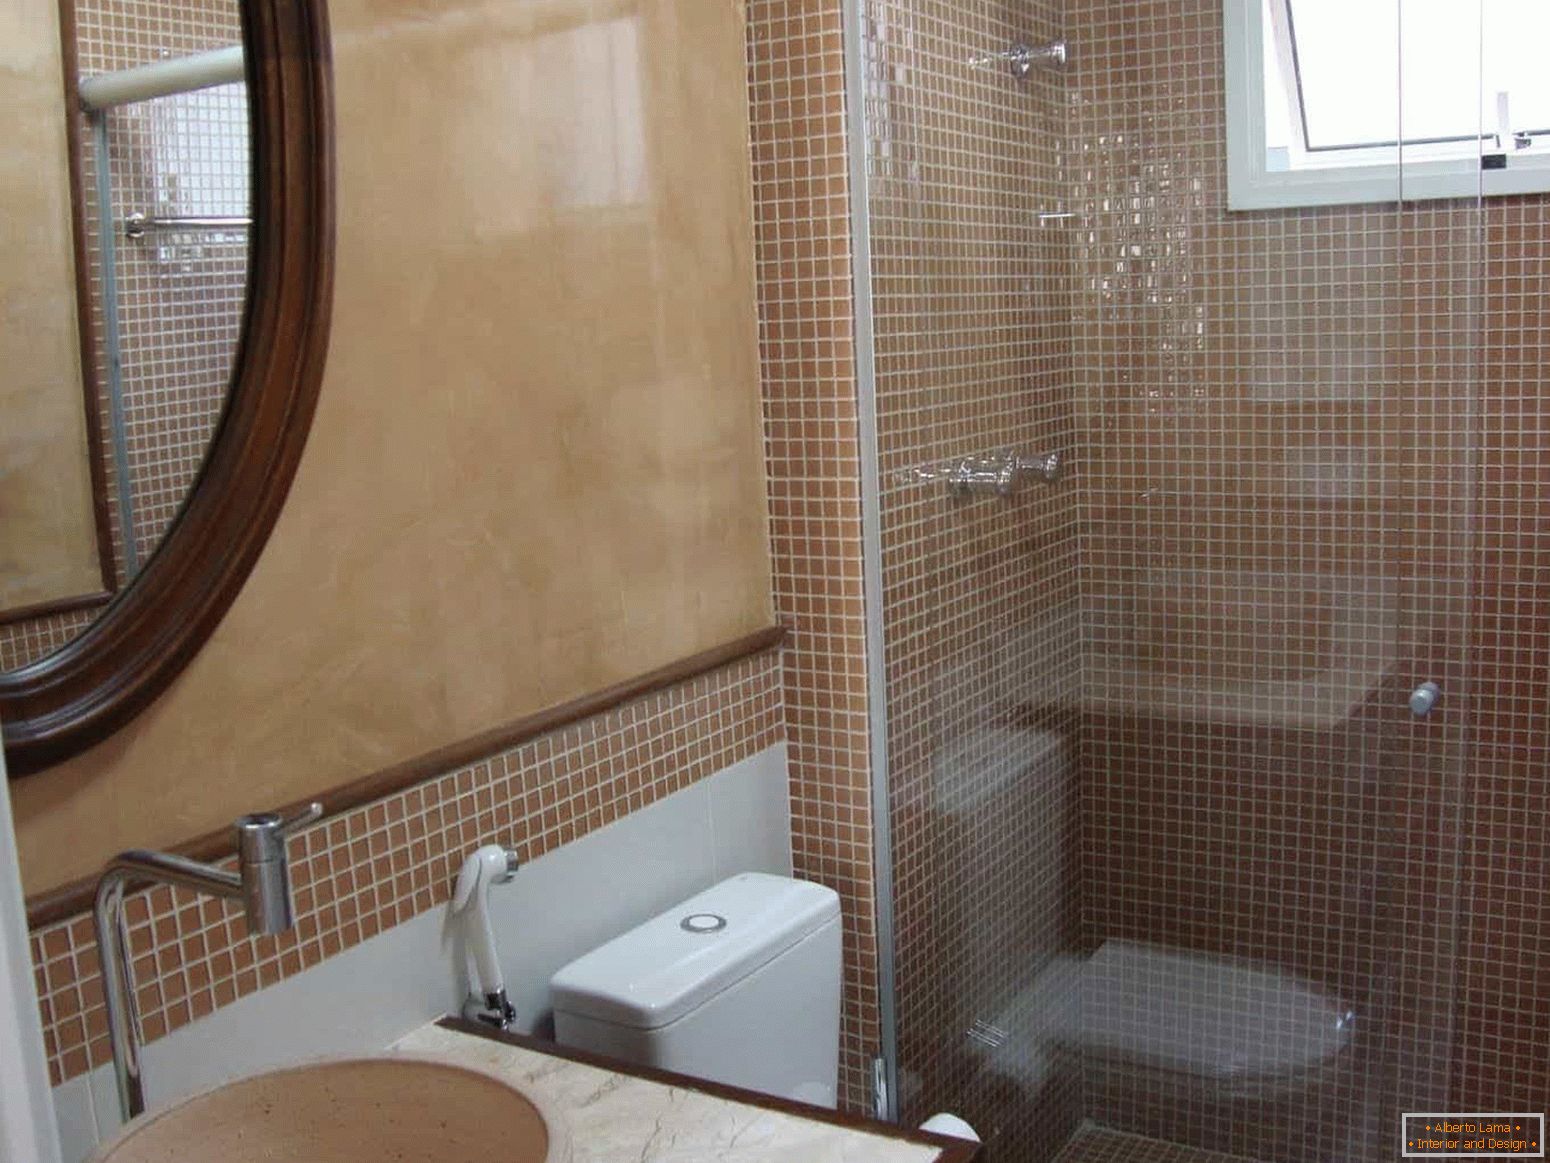 Mosaic is popular in finishing the bathroom in a panel house